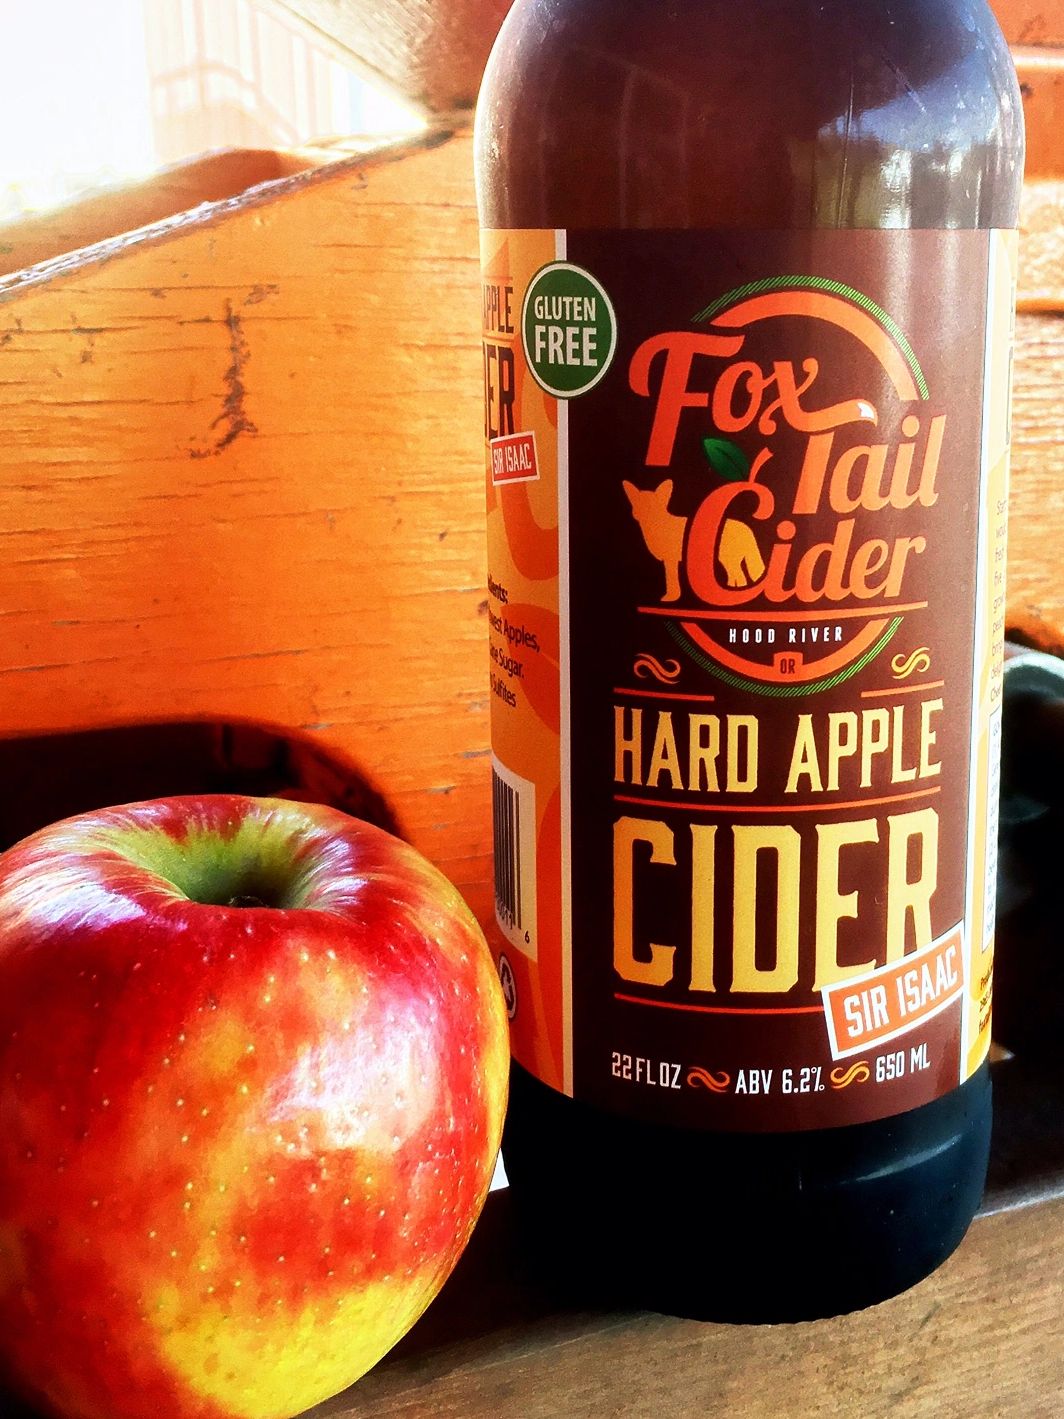 Fox-Tail Hard Cider. Sir Isaac. Welcome to the cider & distillery. 